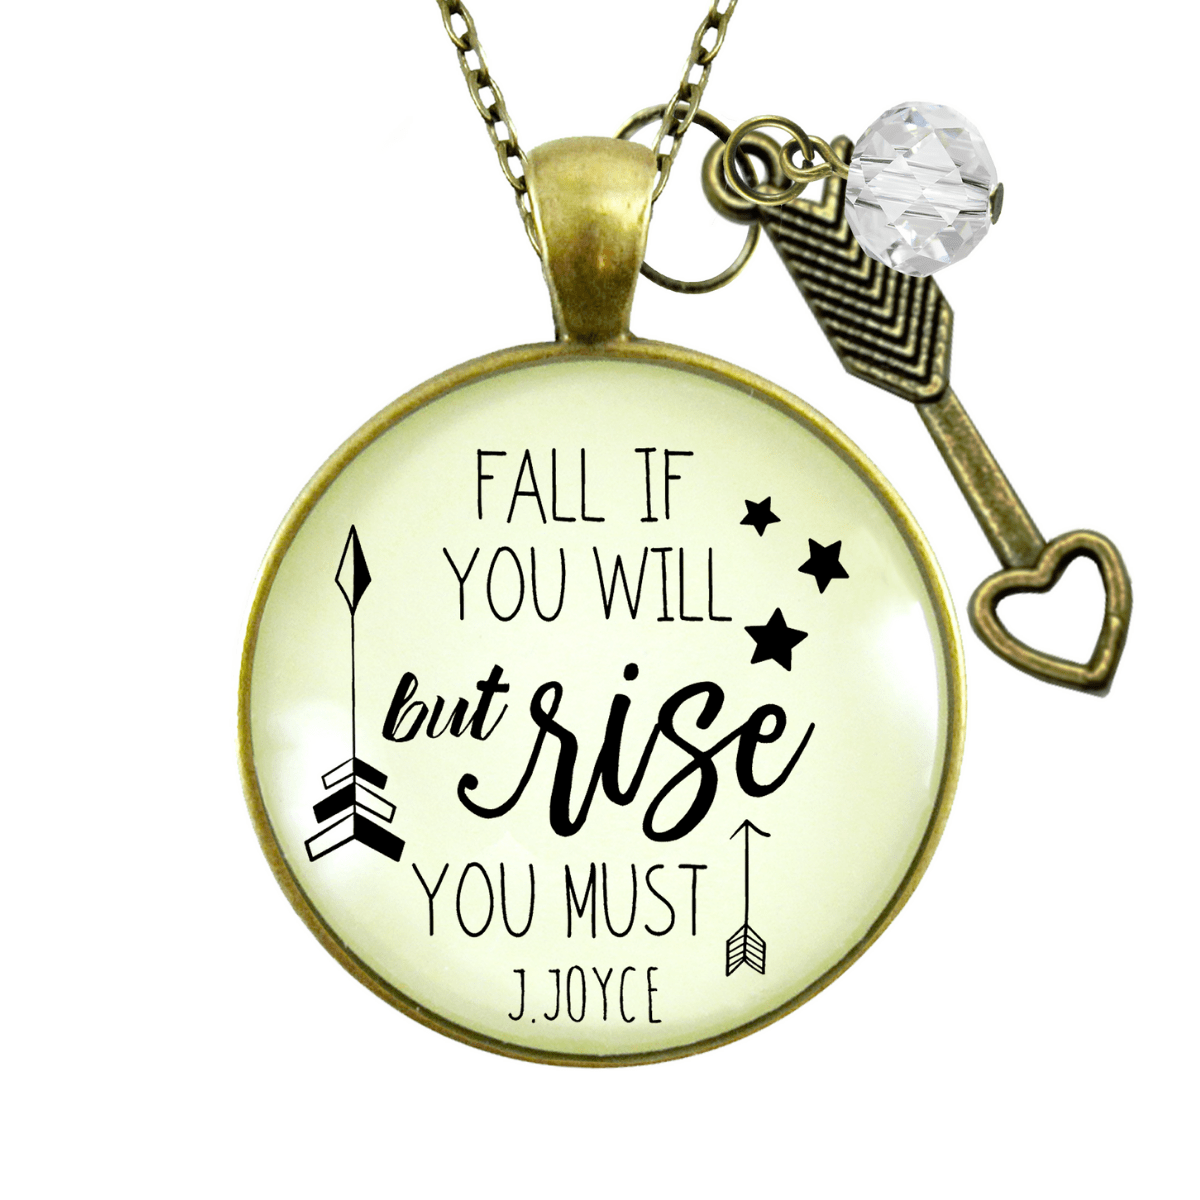 Gutsy Goodness Motivational Necklace Fall If You Will But Rise Positive Word Jewelry - Gutsy Goodness Handmade Jewelry;Motivational Necklace Fall If You Will But Rise Positive Word Jewelry - Gutsy Goodness Handmade Jewelry Gifts